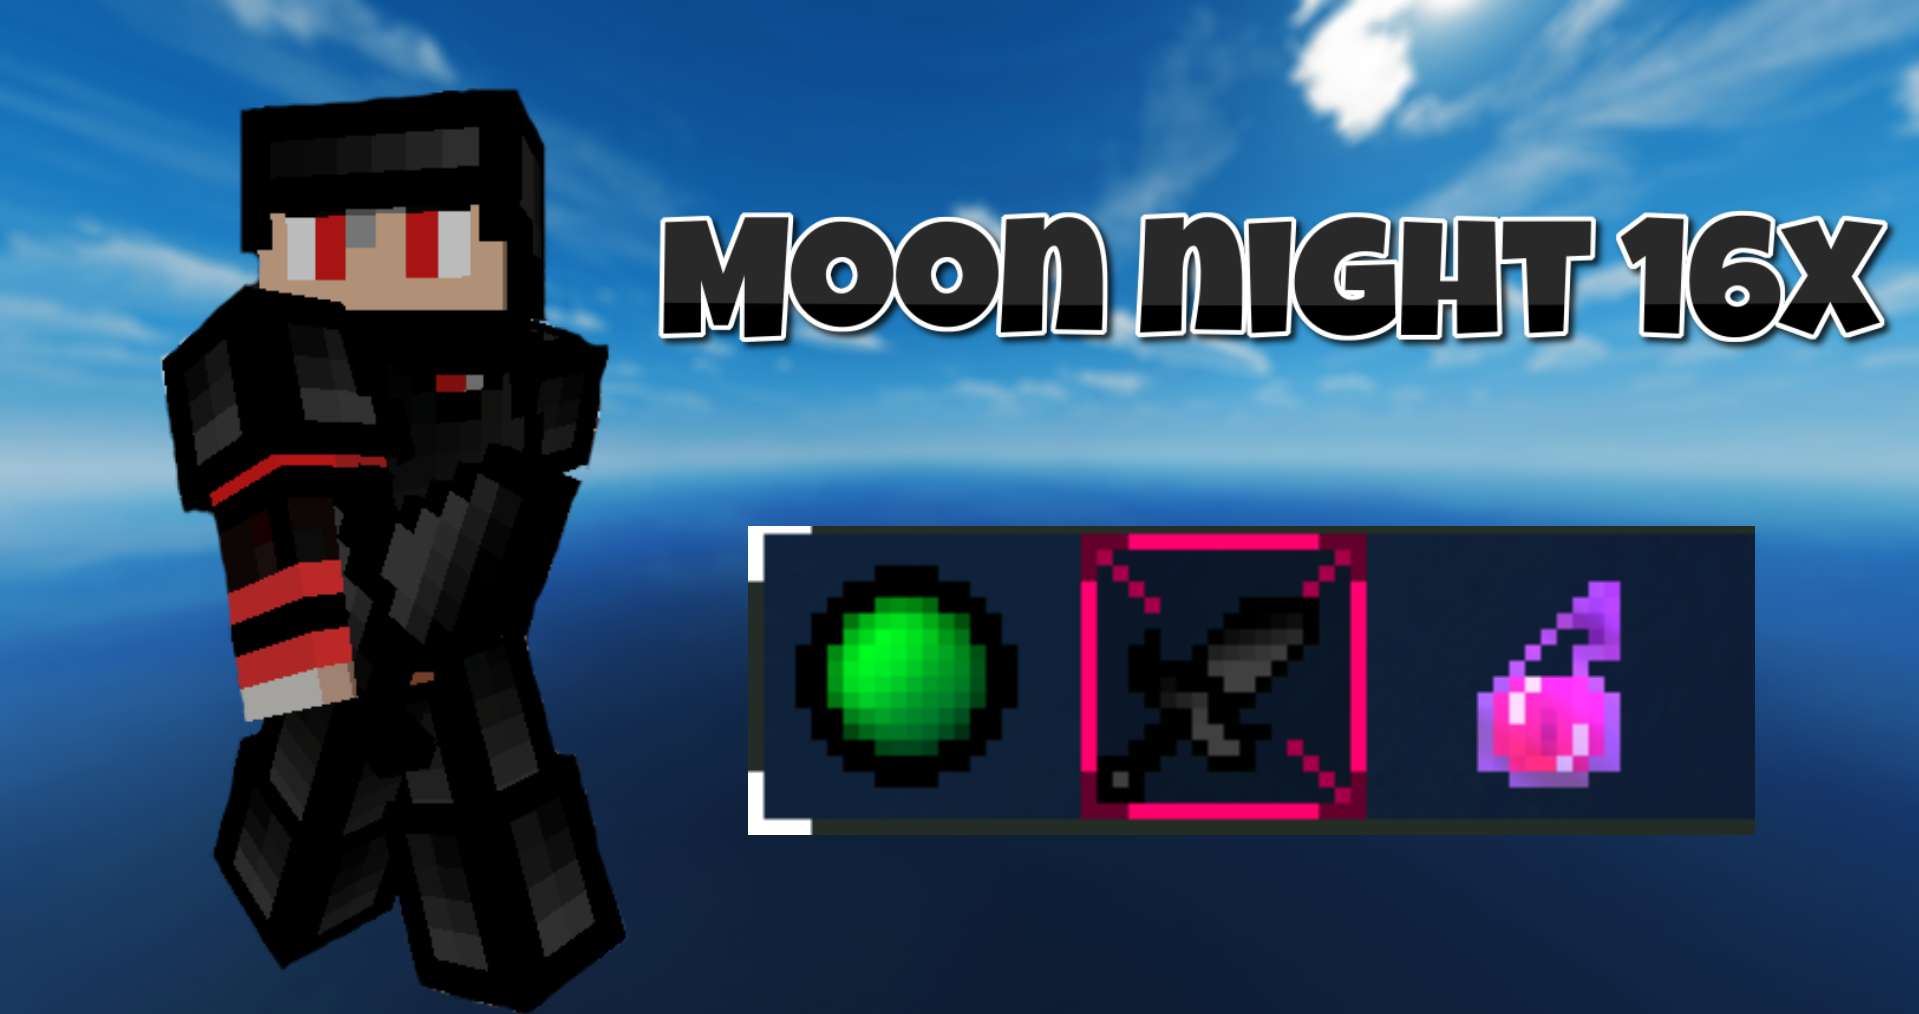 Moon night 16x by 9gamesiscool on PvPRP